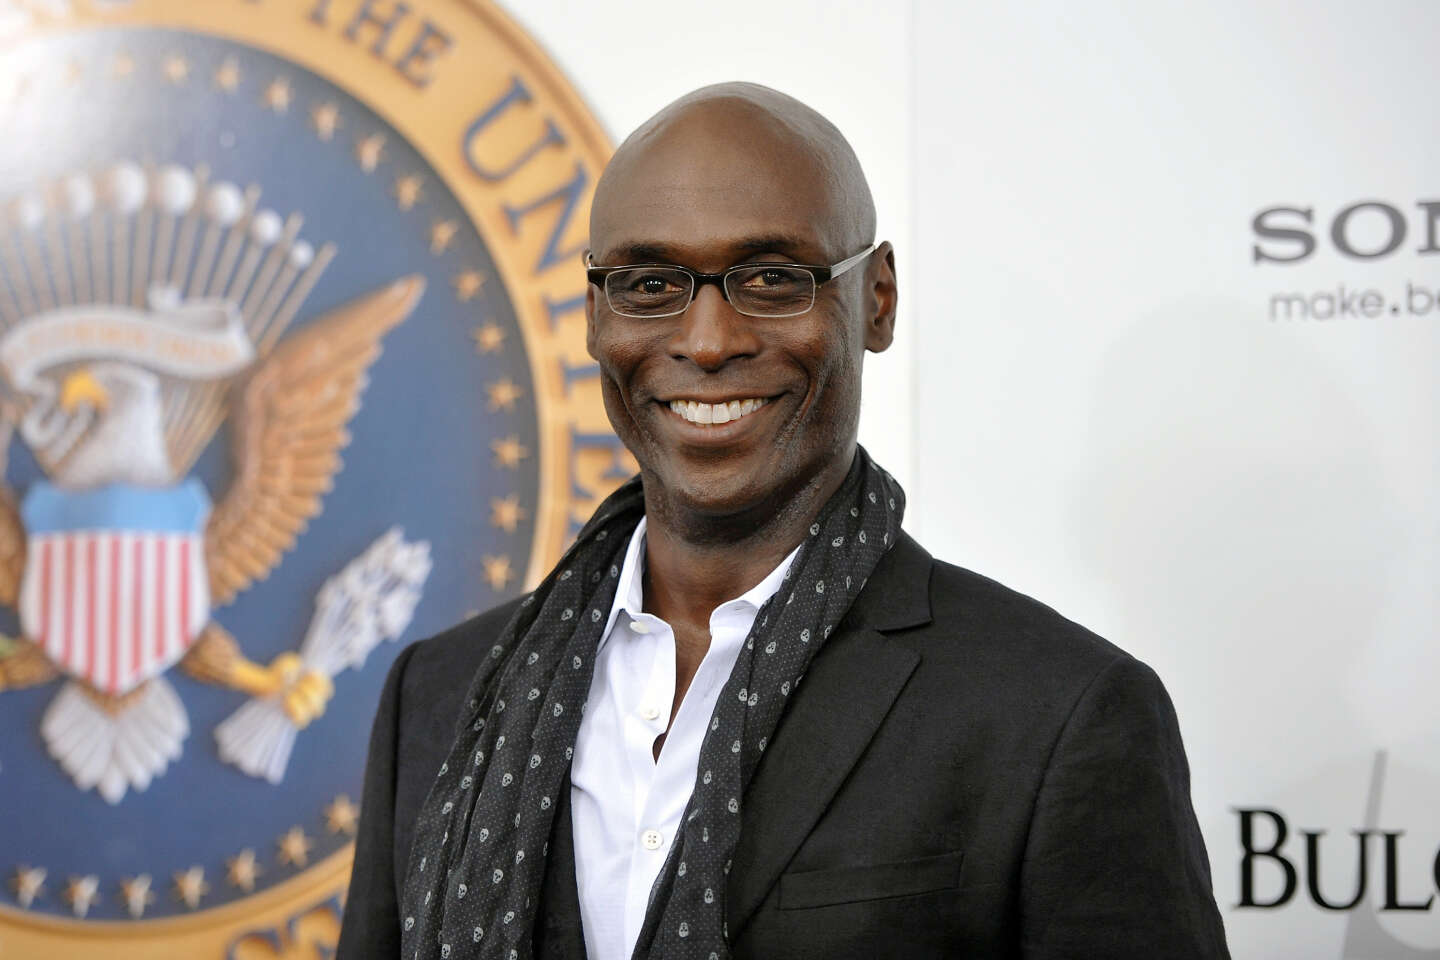 American actor Lance Reddick, famous for his role in “The Wire”, died at the age of 60